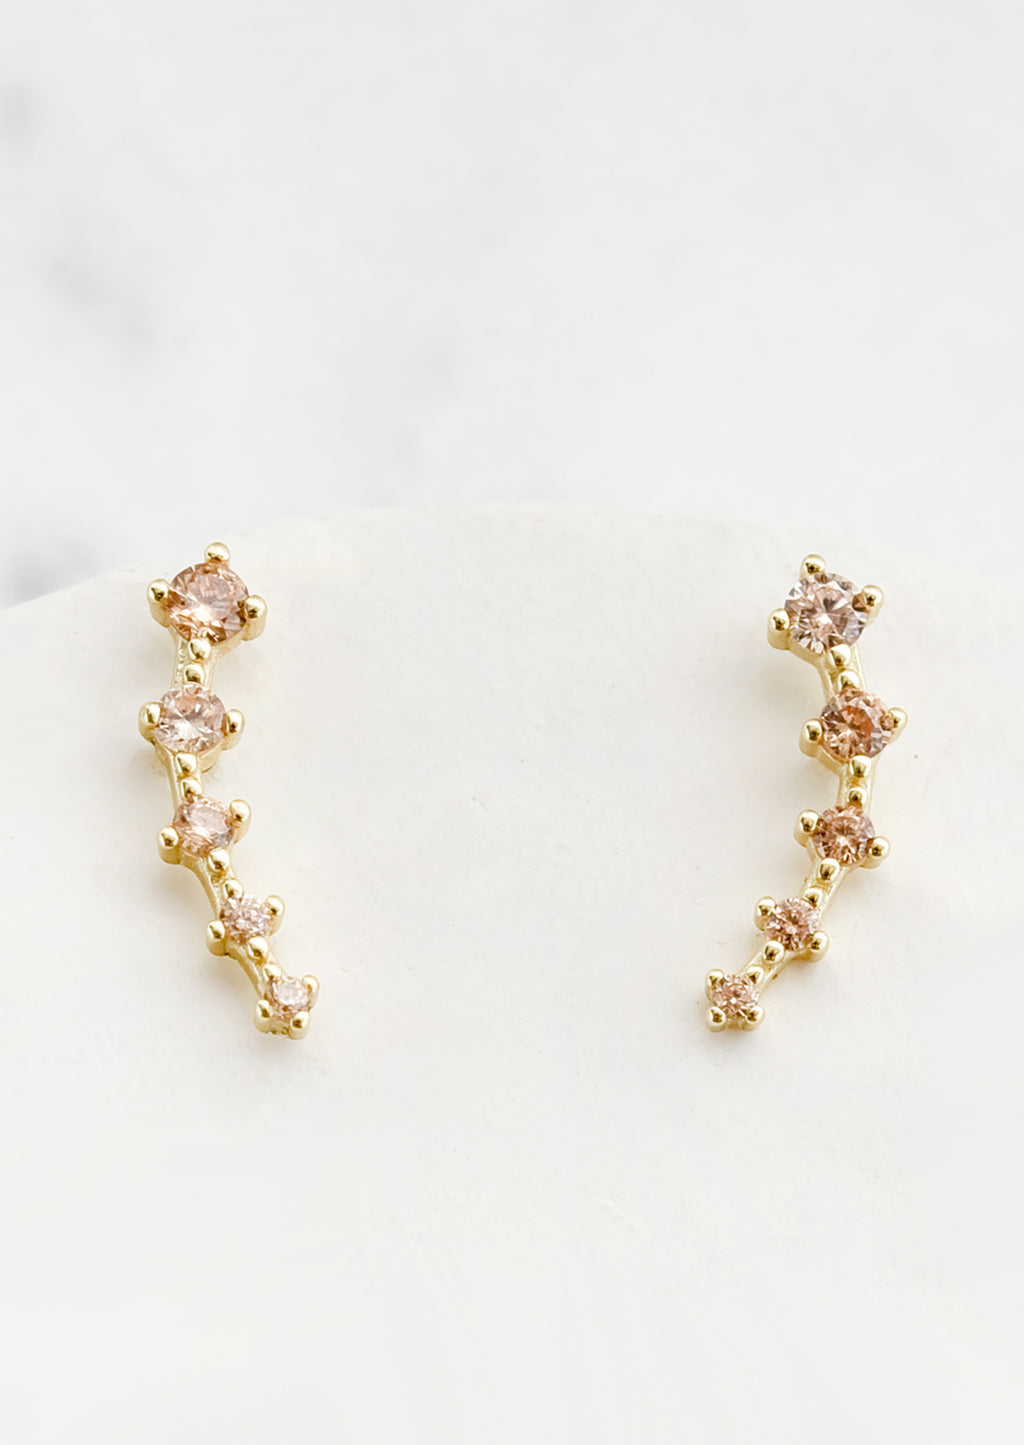 Champagne: Stud earrings with champagne crystals in incremental sizes, designed to climb up the ear